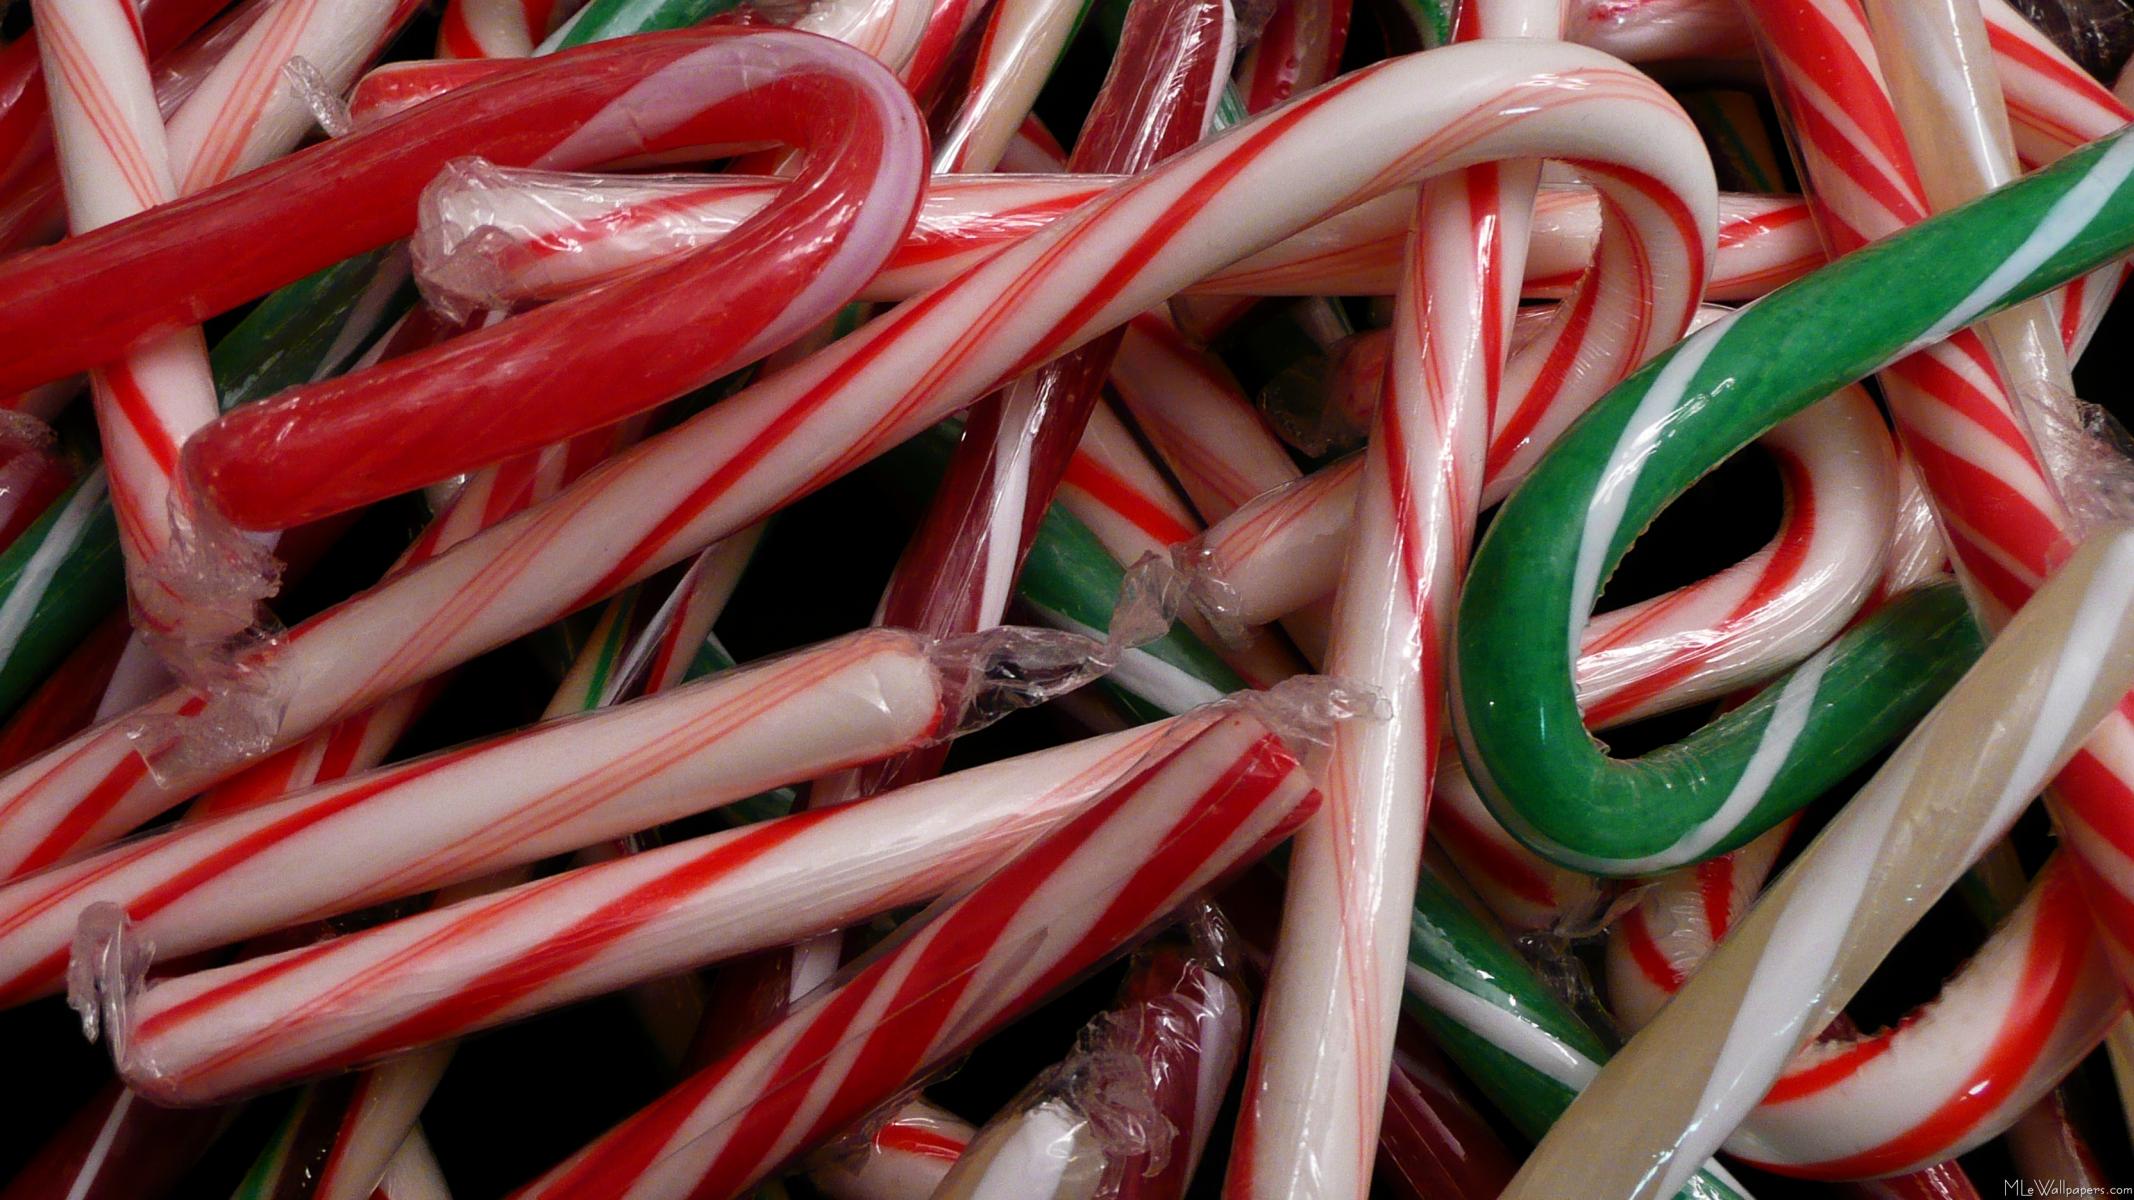 Here's a great wallpaper of assorted Christmas candy canes.